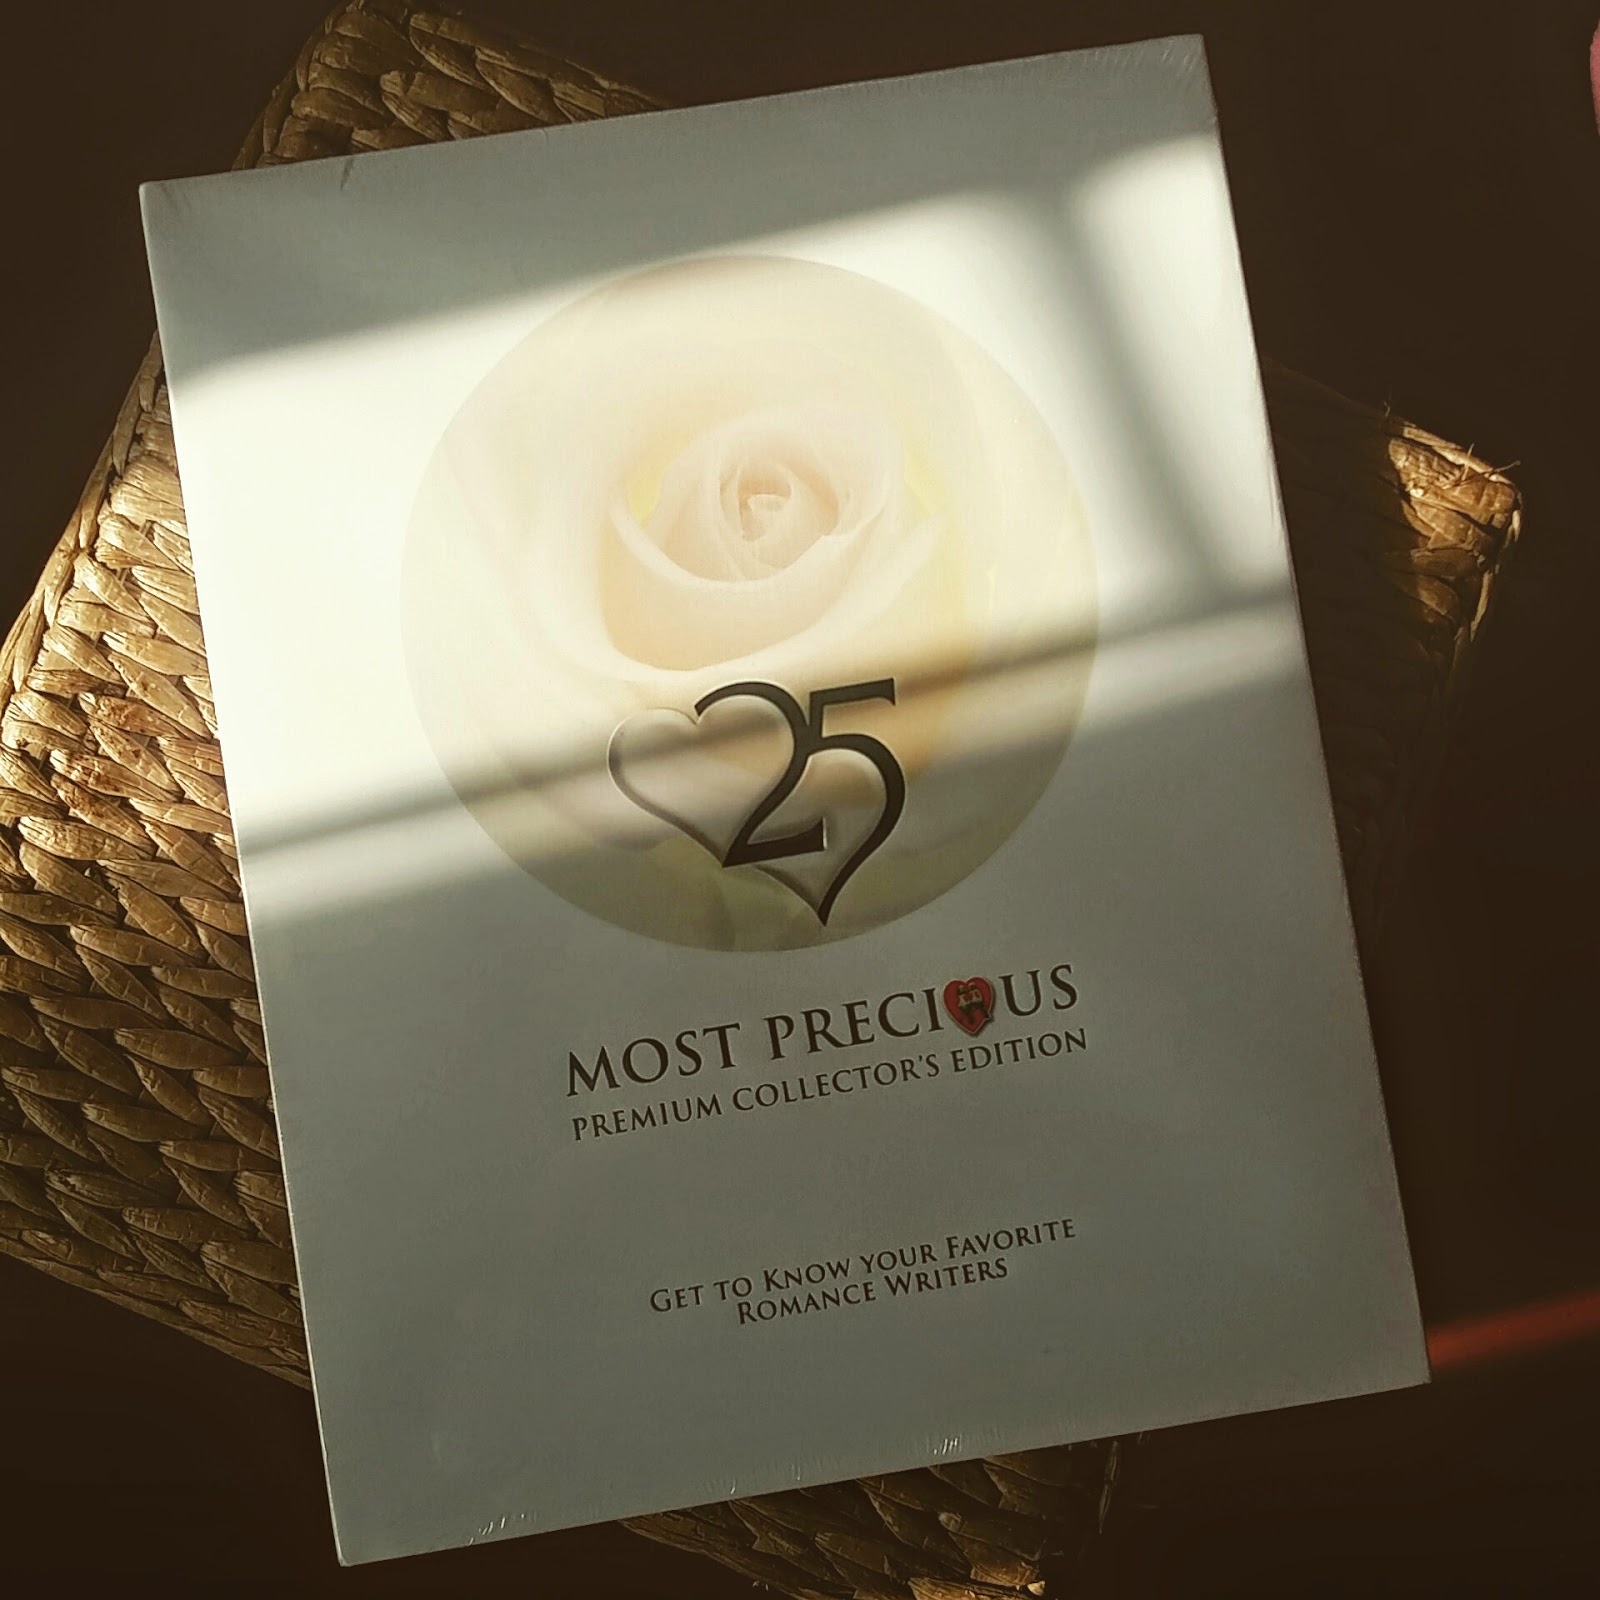 "25 Most Precious" The Coffee Table Book Plus Giveaway